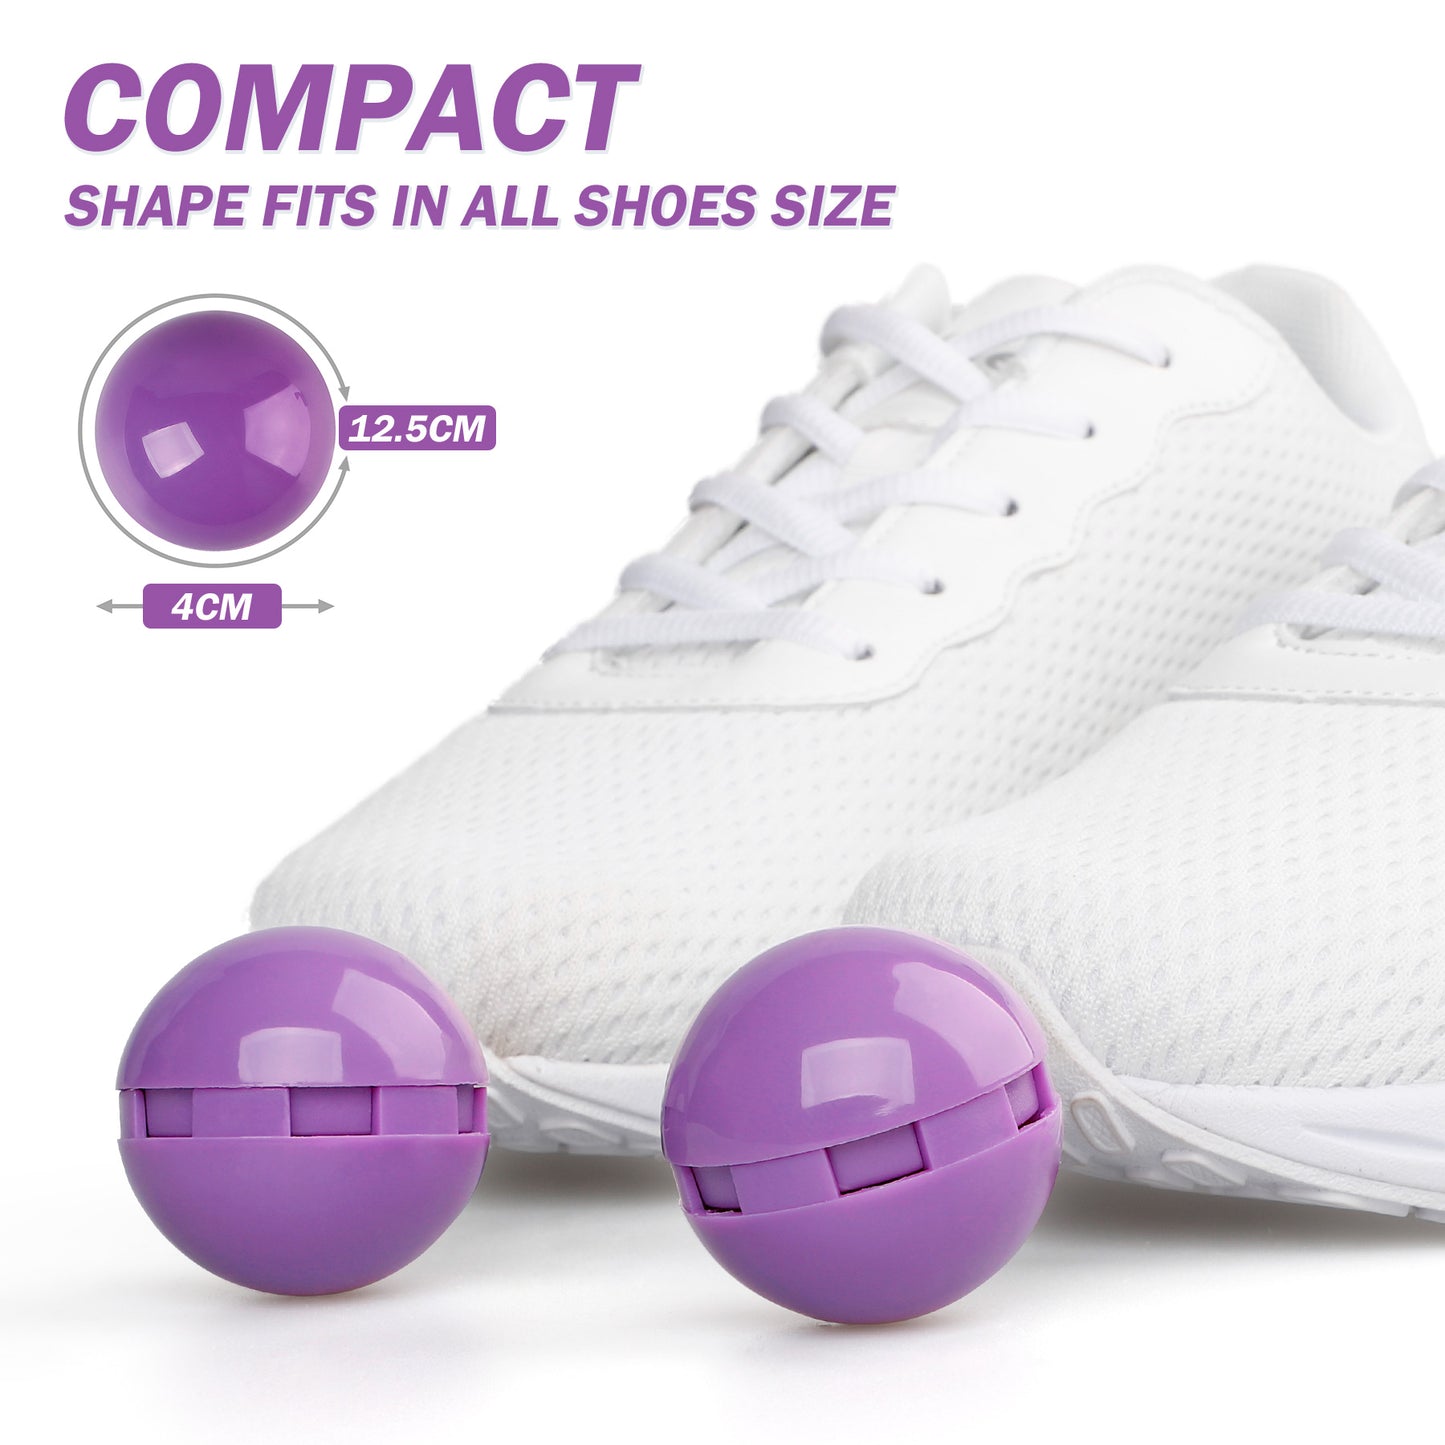 Knixmax Outdoor Aromatherapy Ball Shoe Odour Eliminator for Sneakers Kitchen Bedroom Bathroom Six Ball Pack/Lavender/Purple